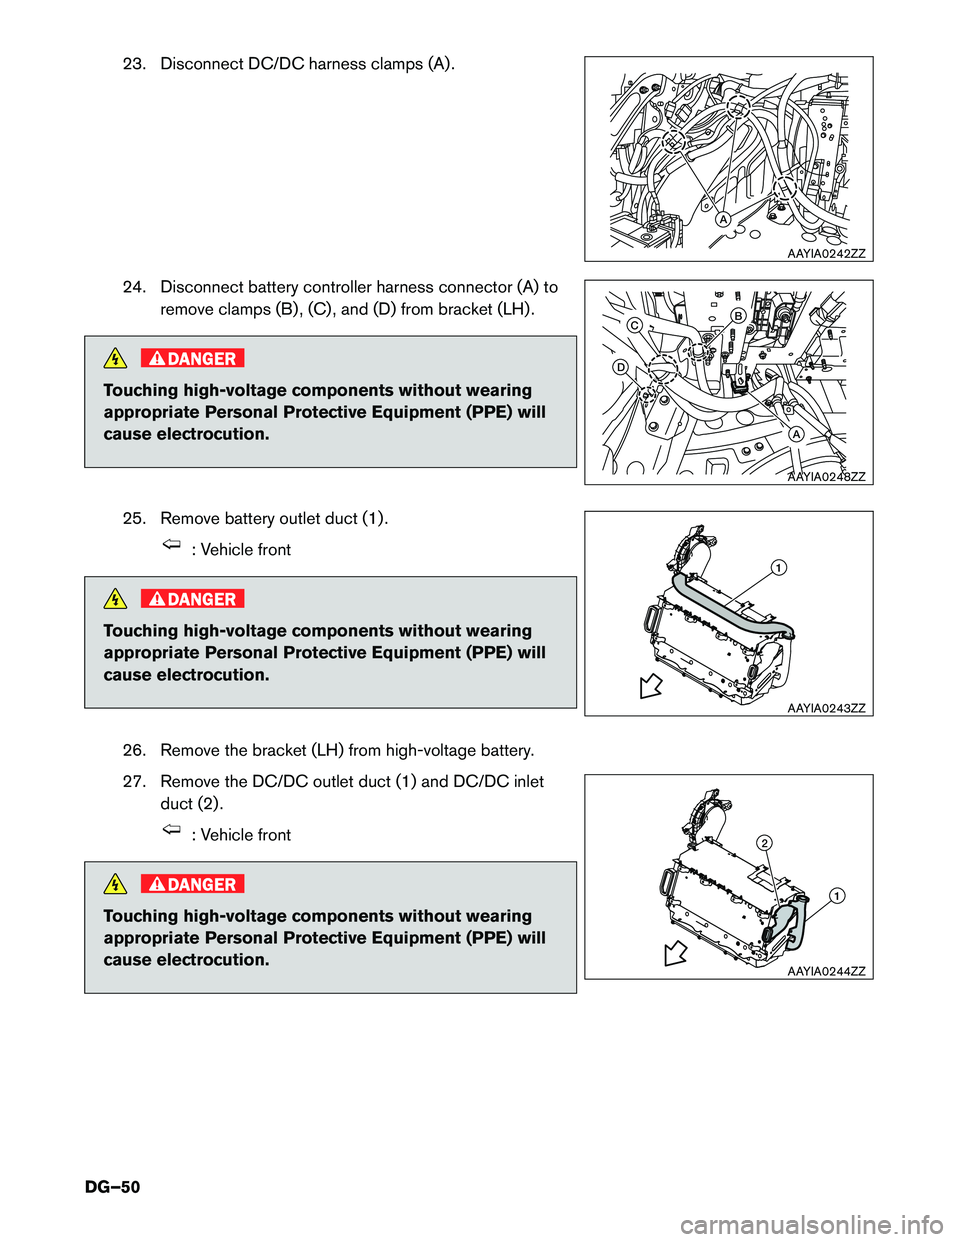 INFINITI Q50 HYBRID 2017  Dismantling Guide 23. Disconnect DC/DC harness clamps (A) .
24.
Disconnect battery controller harness connector (A) to
remove clamps (B) , (C) , and (D) from bracket (LH) . DANGER
Touching high-voltage components witho